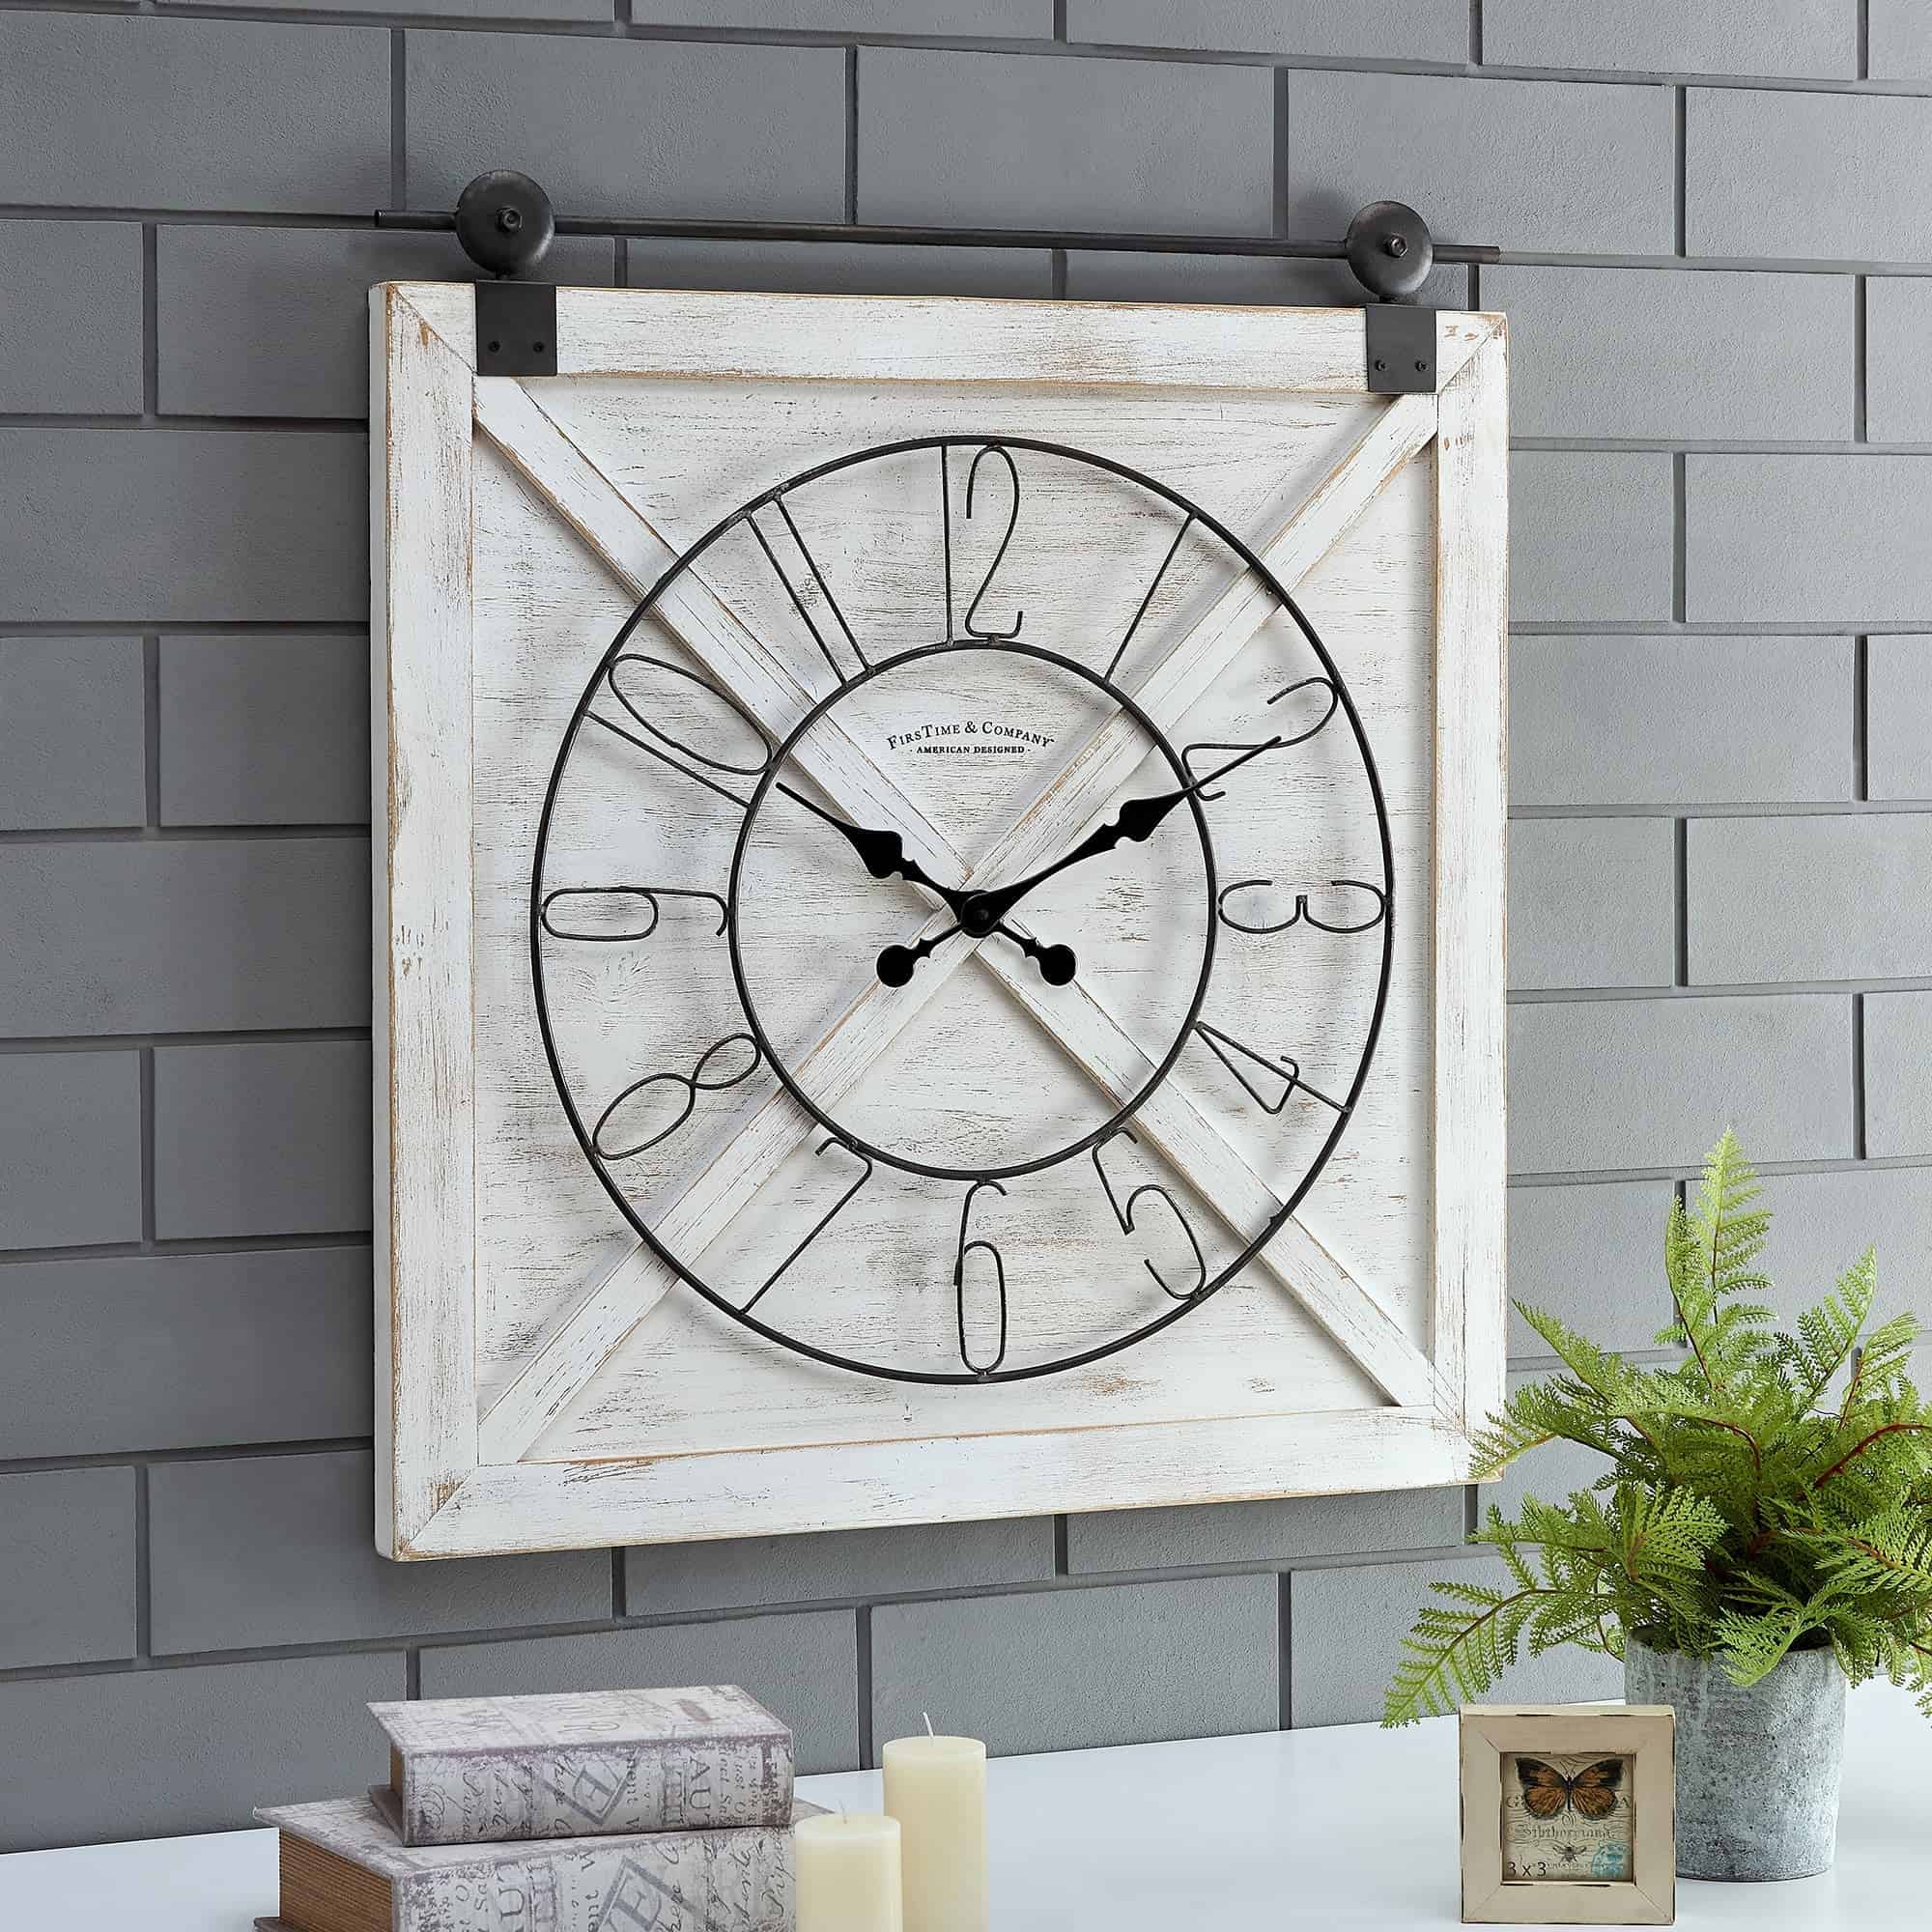 A Barn Door Themed Clock Fits Perfectly in a Rustic Kitchen